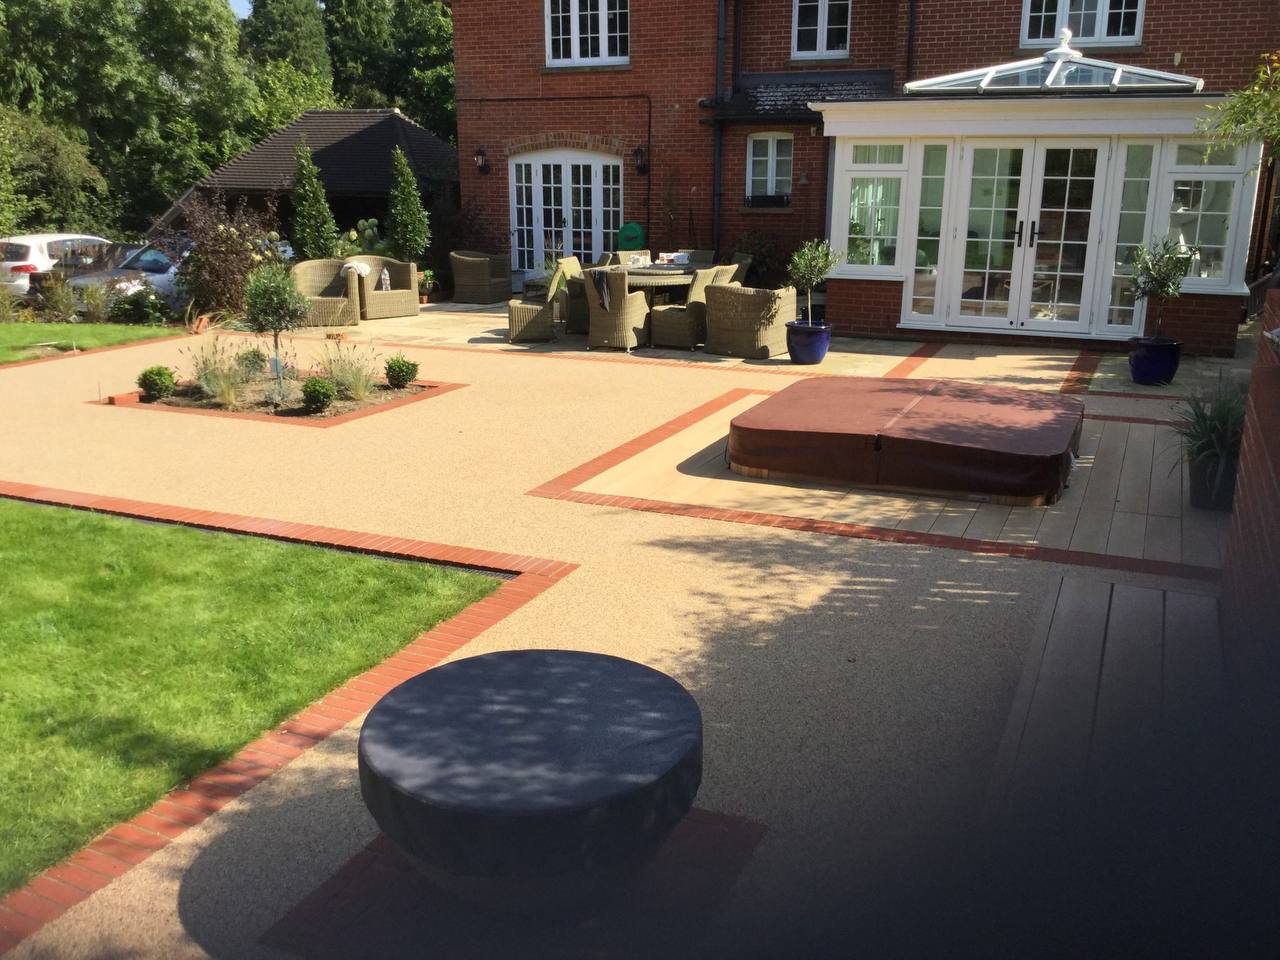 This is a photo of a Resin bound patio carried out in Darlington. All works done by Bury Resin Driveways Darlington